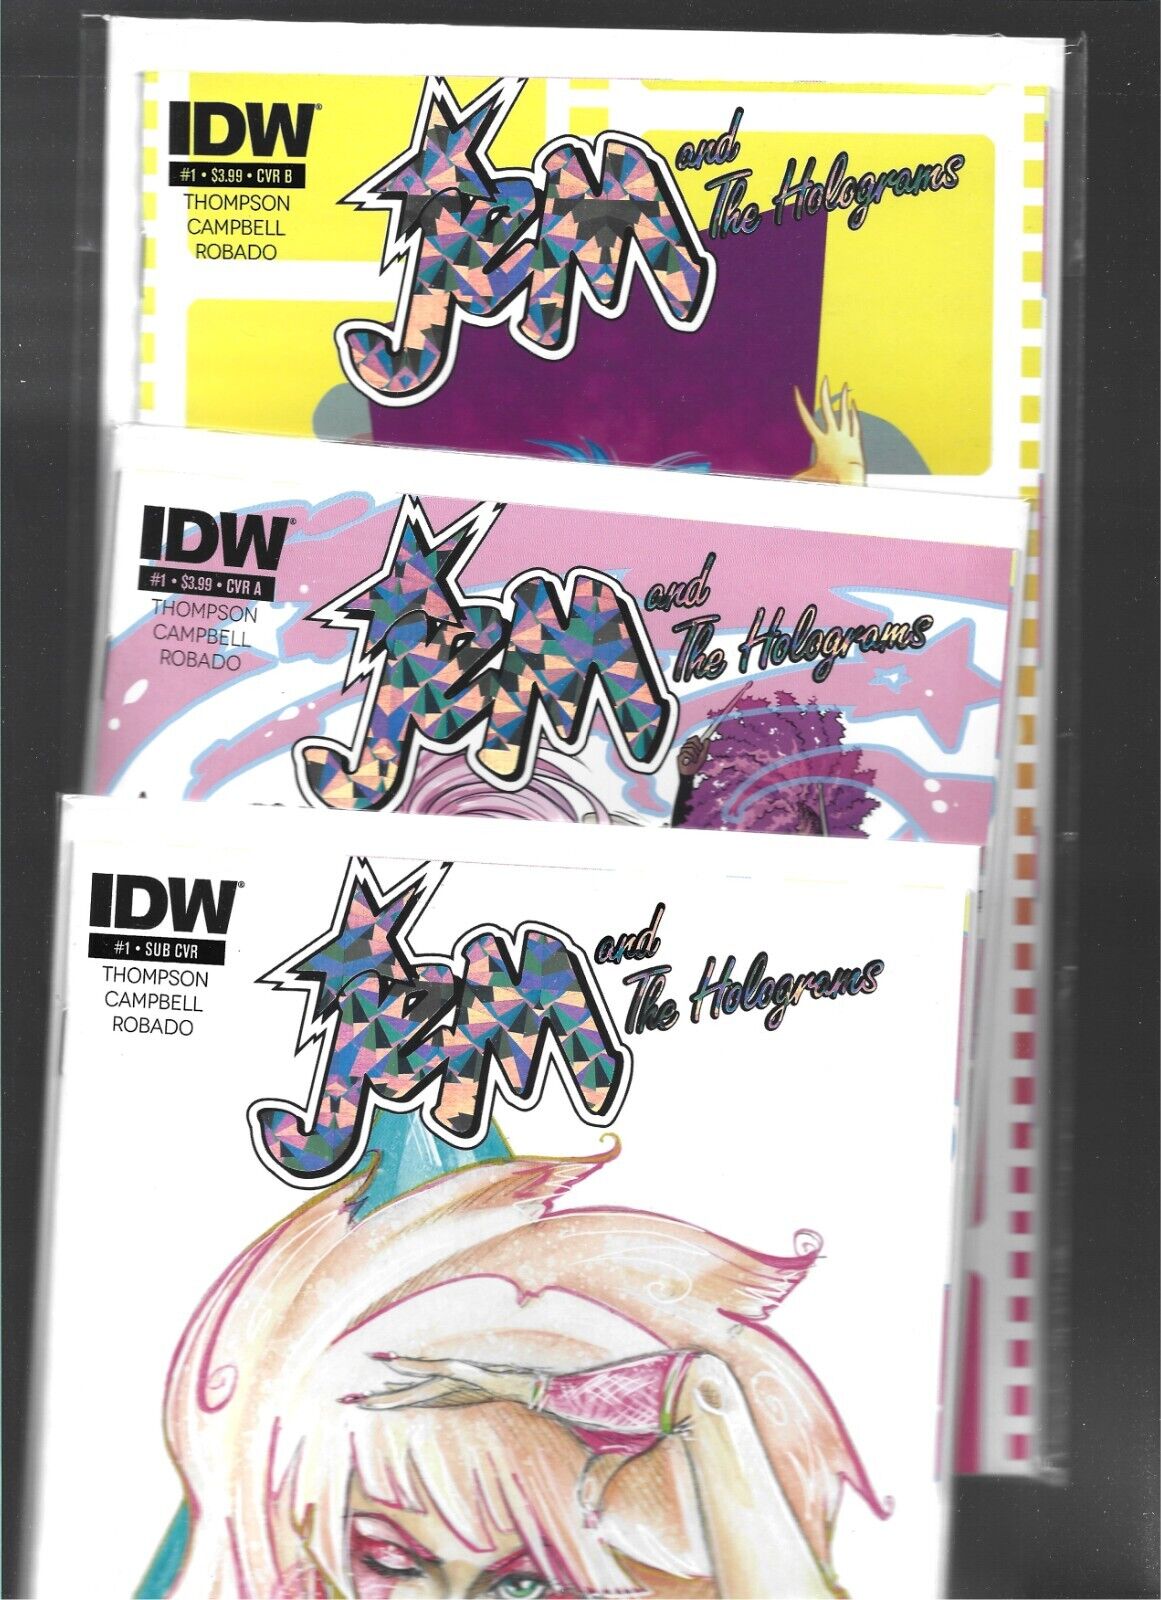 Jem and the Holograms #1 - 3 variants - prism foil covers